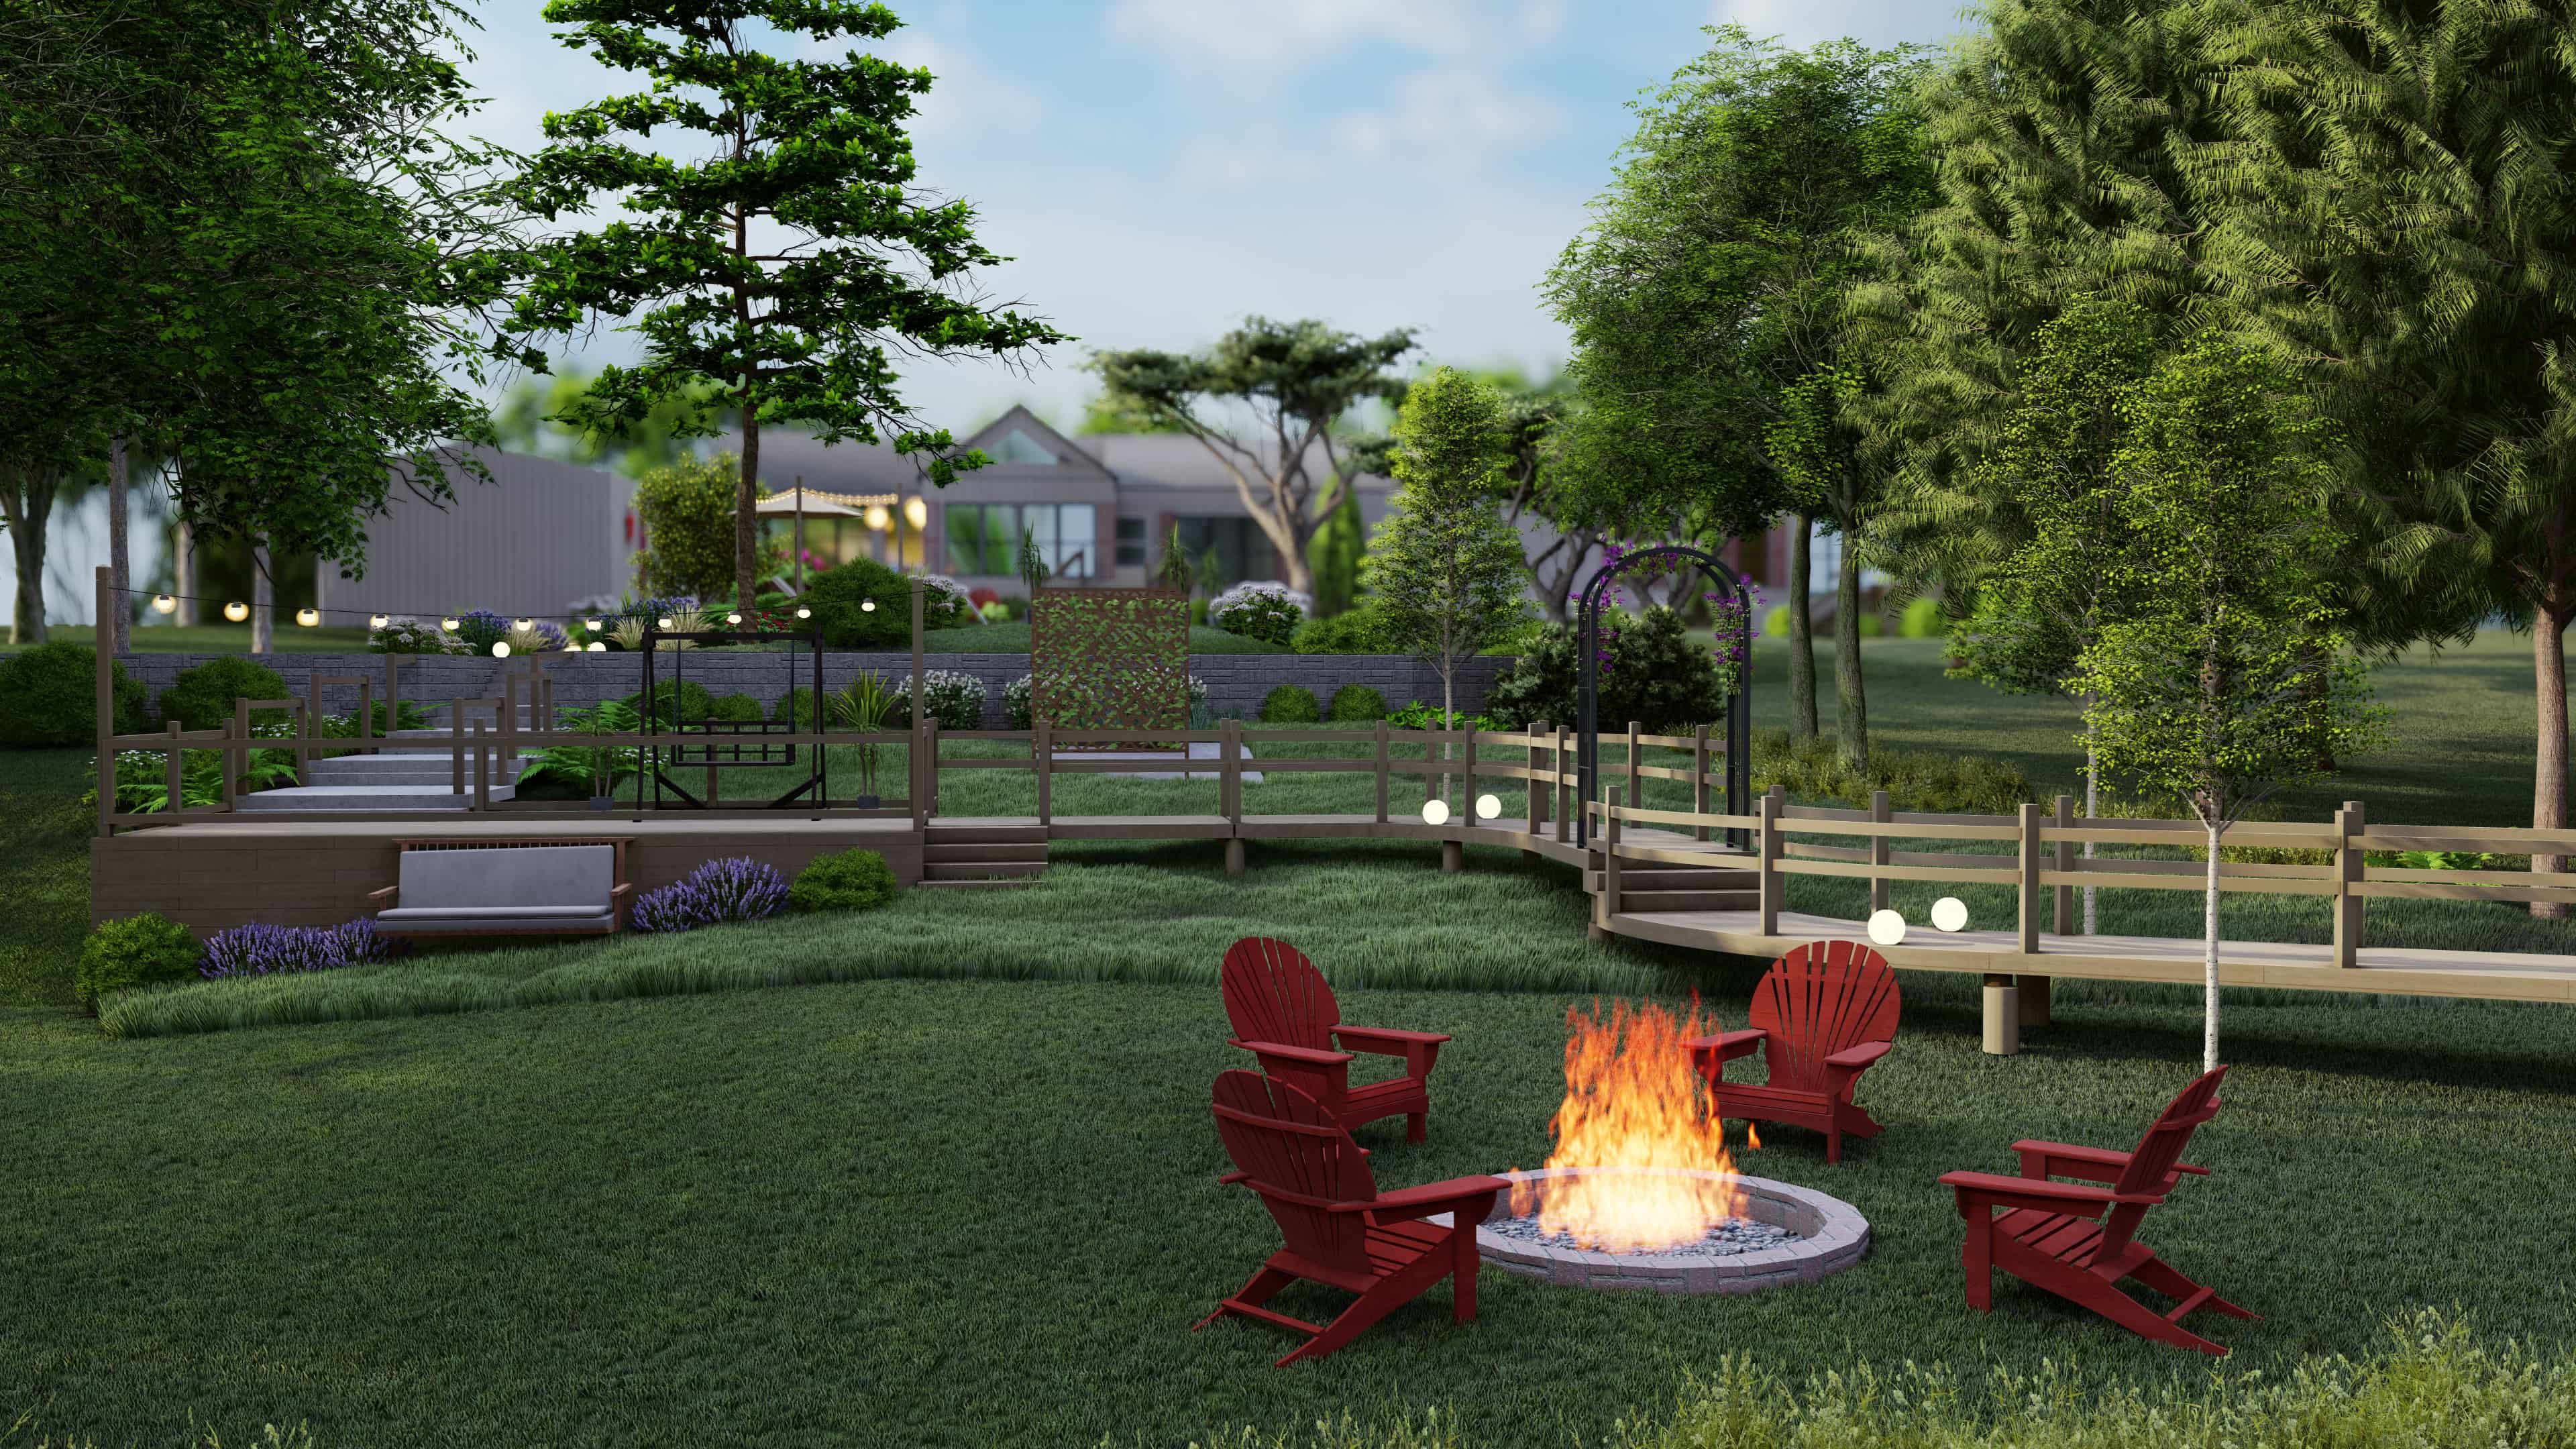 A serene backyard garden at dusk featuring two red Adirondack chairs facing a lit fire pit, surrounded by lush greenery, trees, and a well-manicured lawn. A wooden deck with benches and decorative lights can be seen in the background, creating a cozy outdoor living space